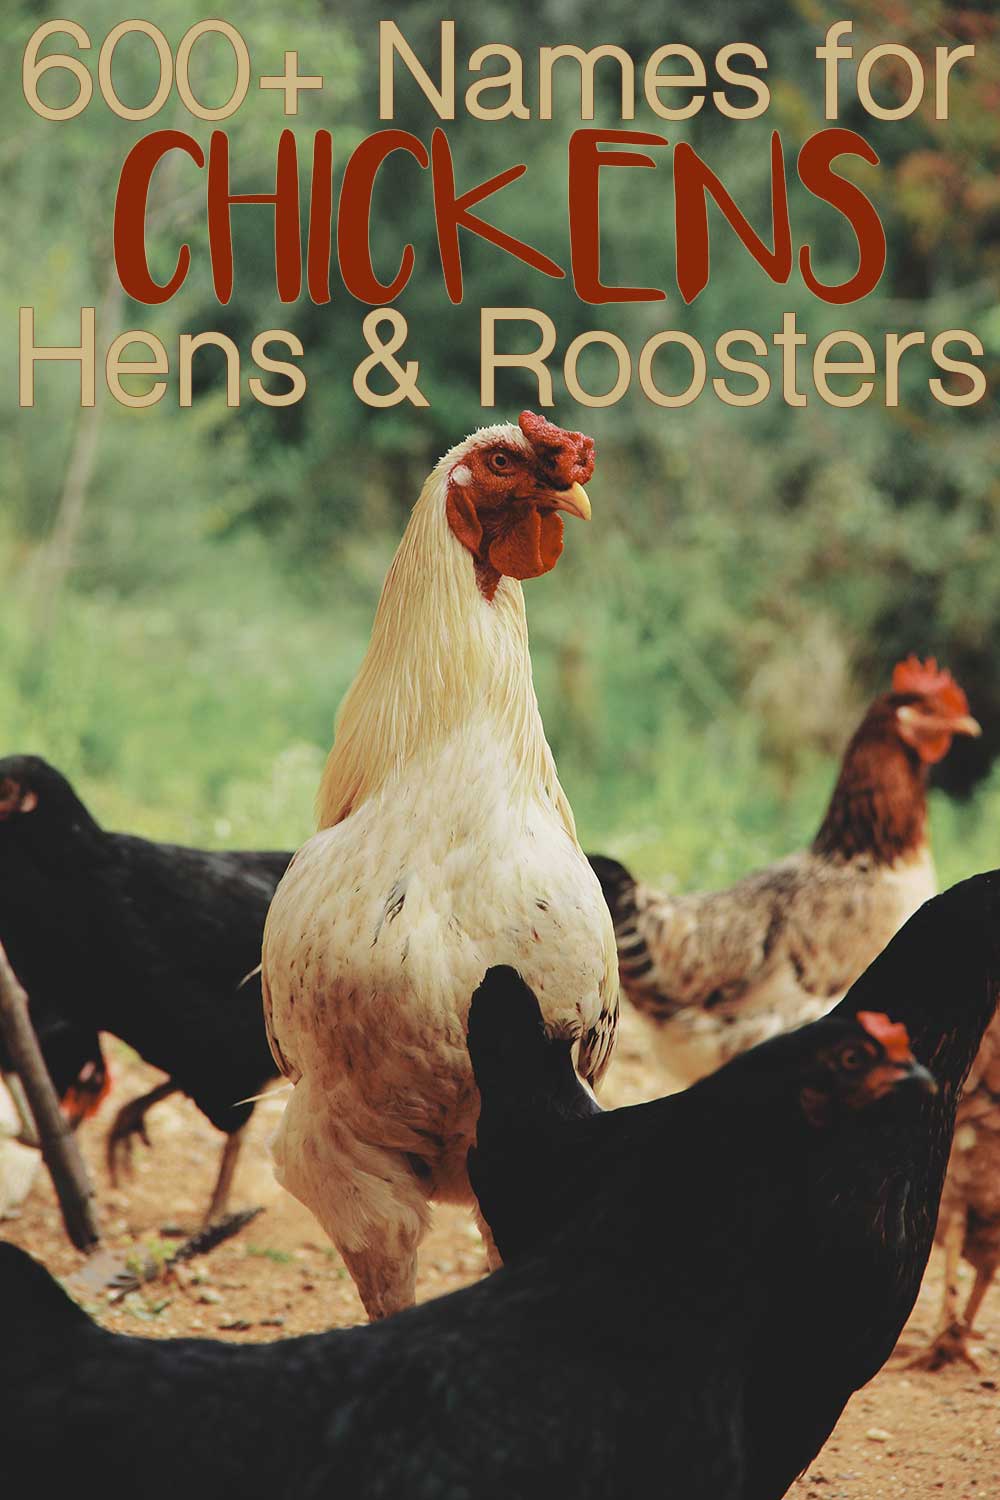 600+ Names for Chickens, Hens, and Roosters